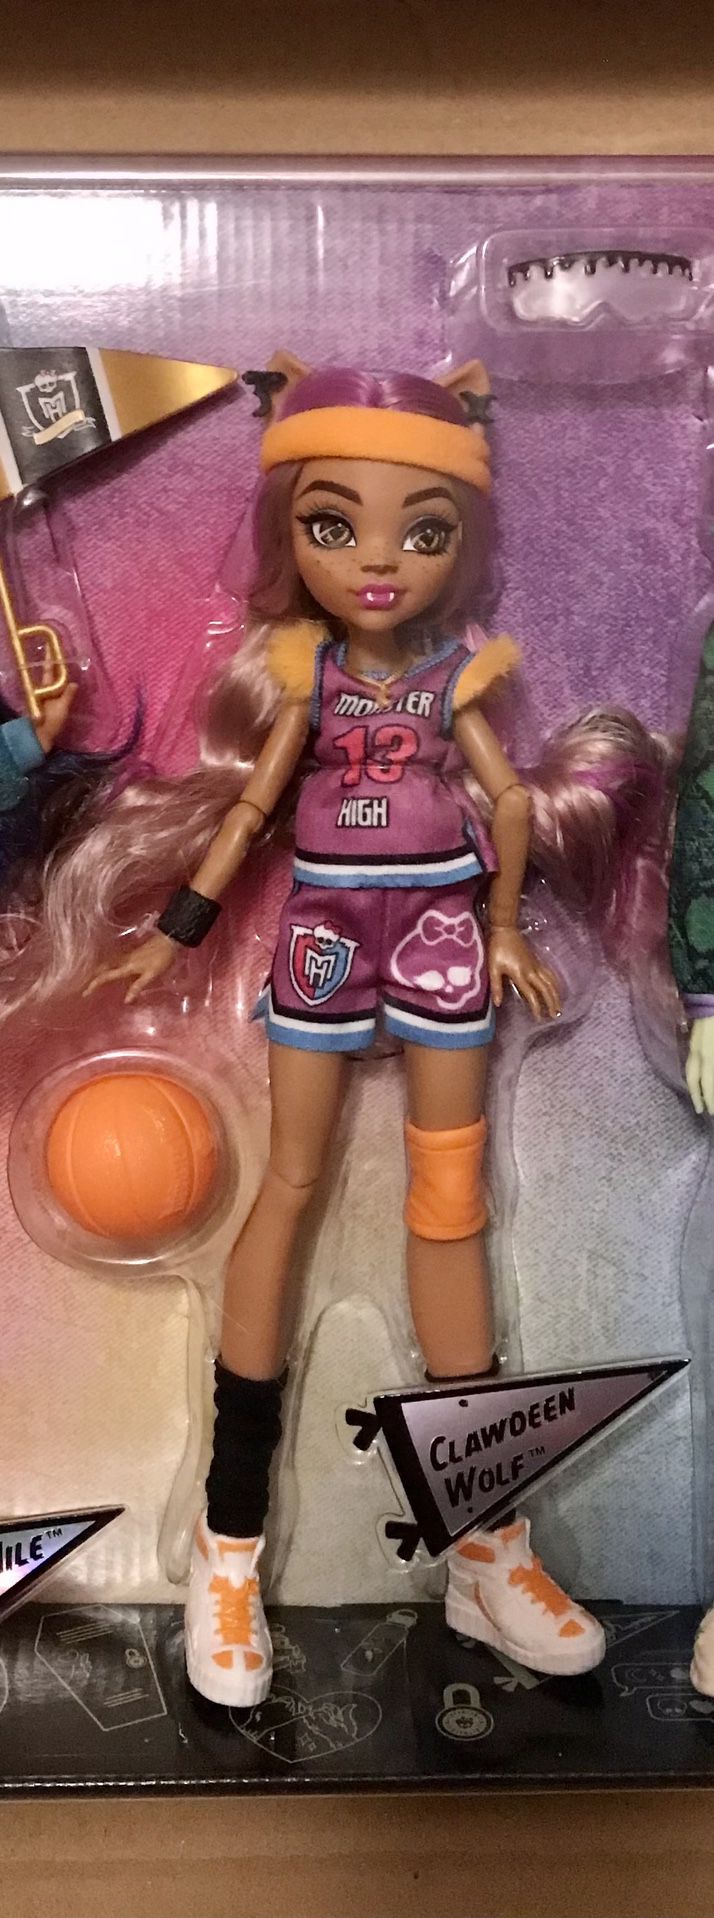 Monster High Clawdeen Wolf Generation 3 G3 Reboot NEW! Doll is taken out of the Ghoul Spirit 6 pack. Loose, No doll box. Will be put in a shipping box